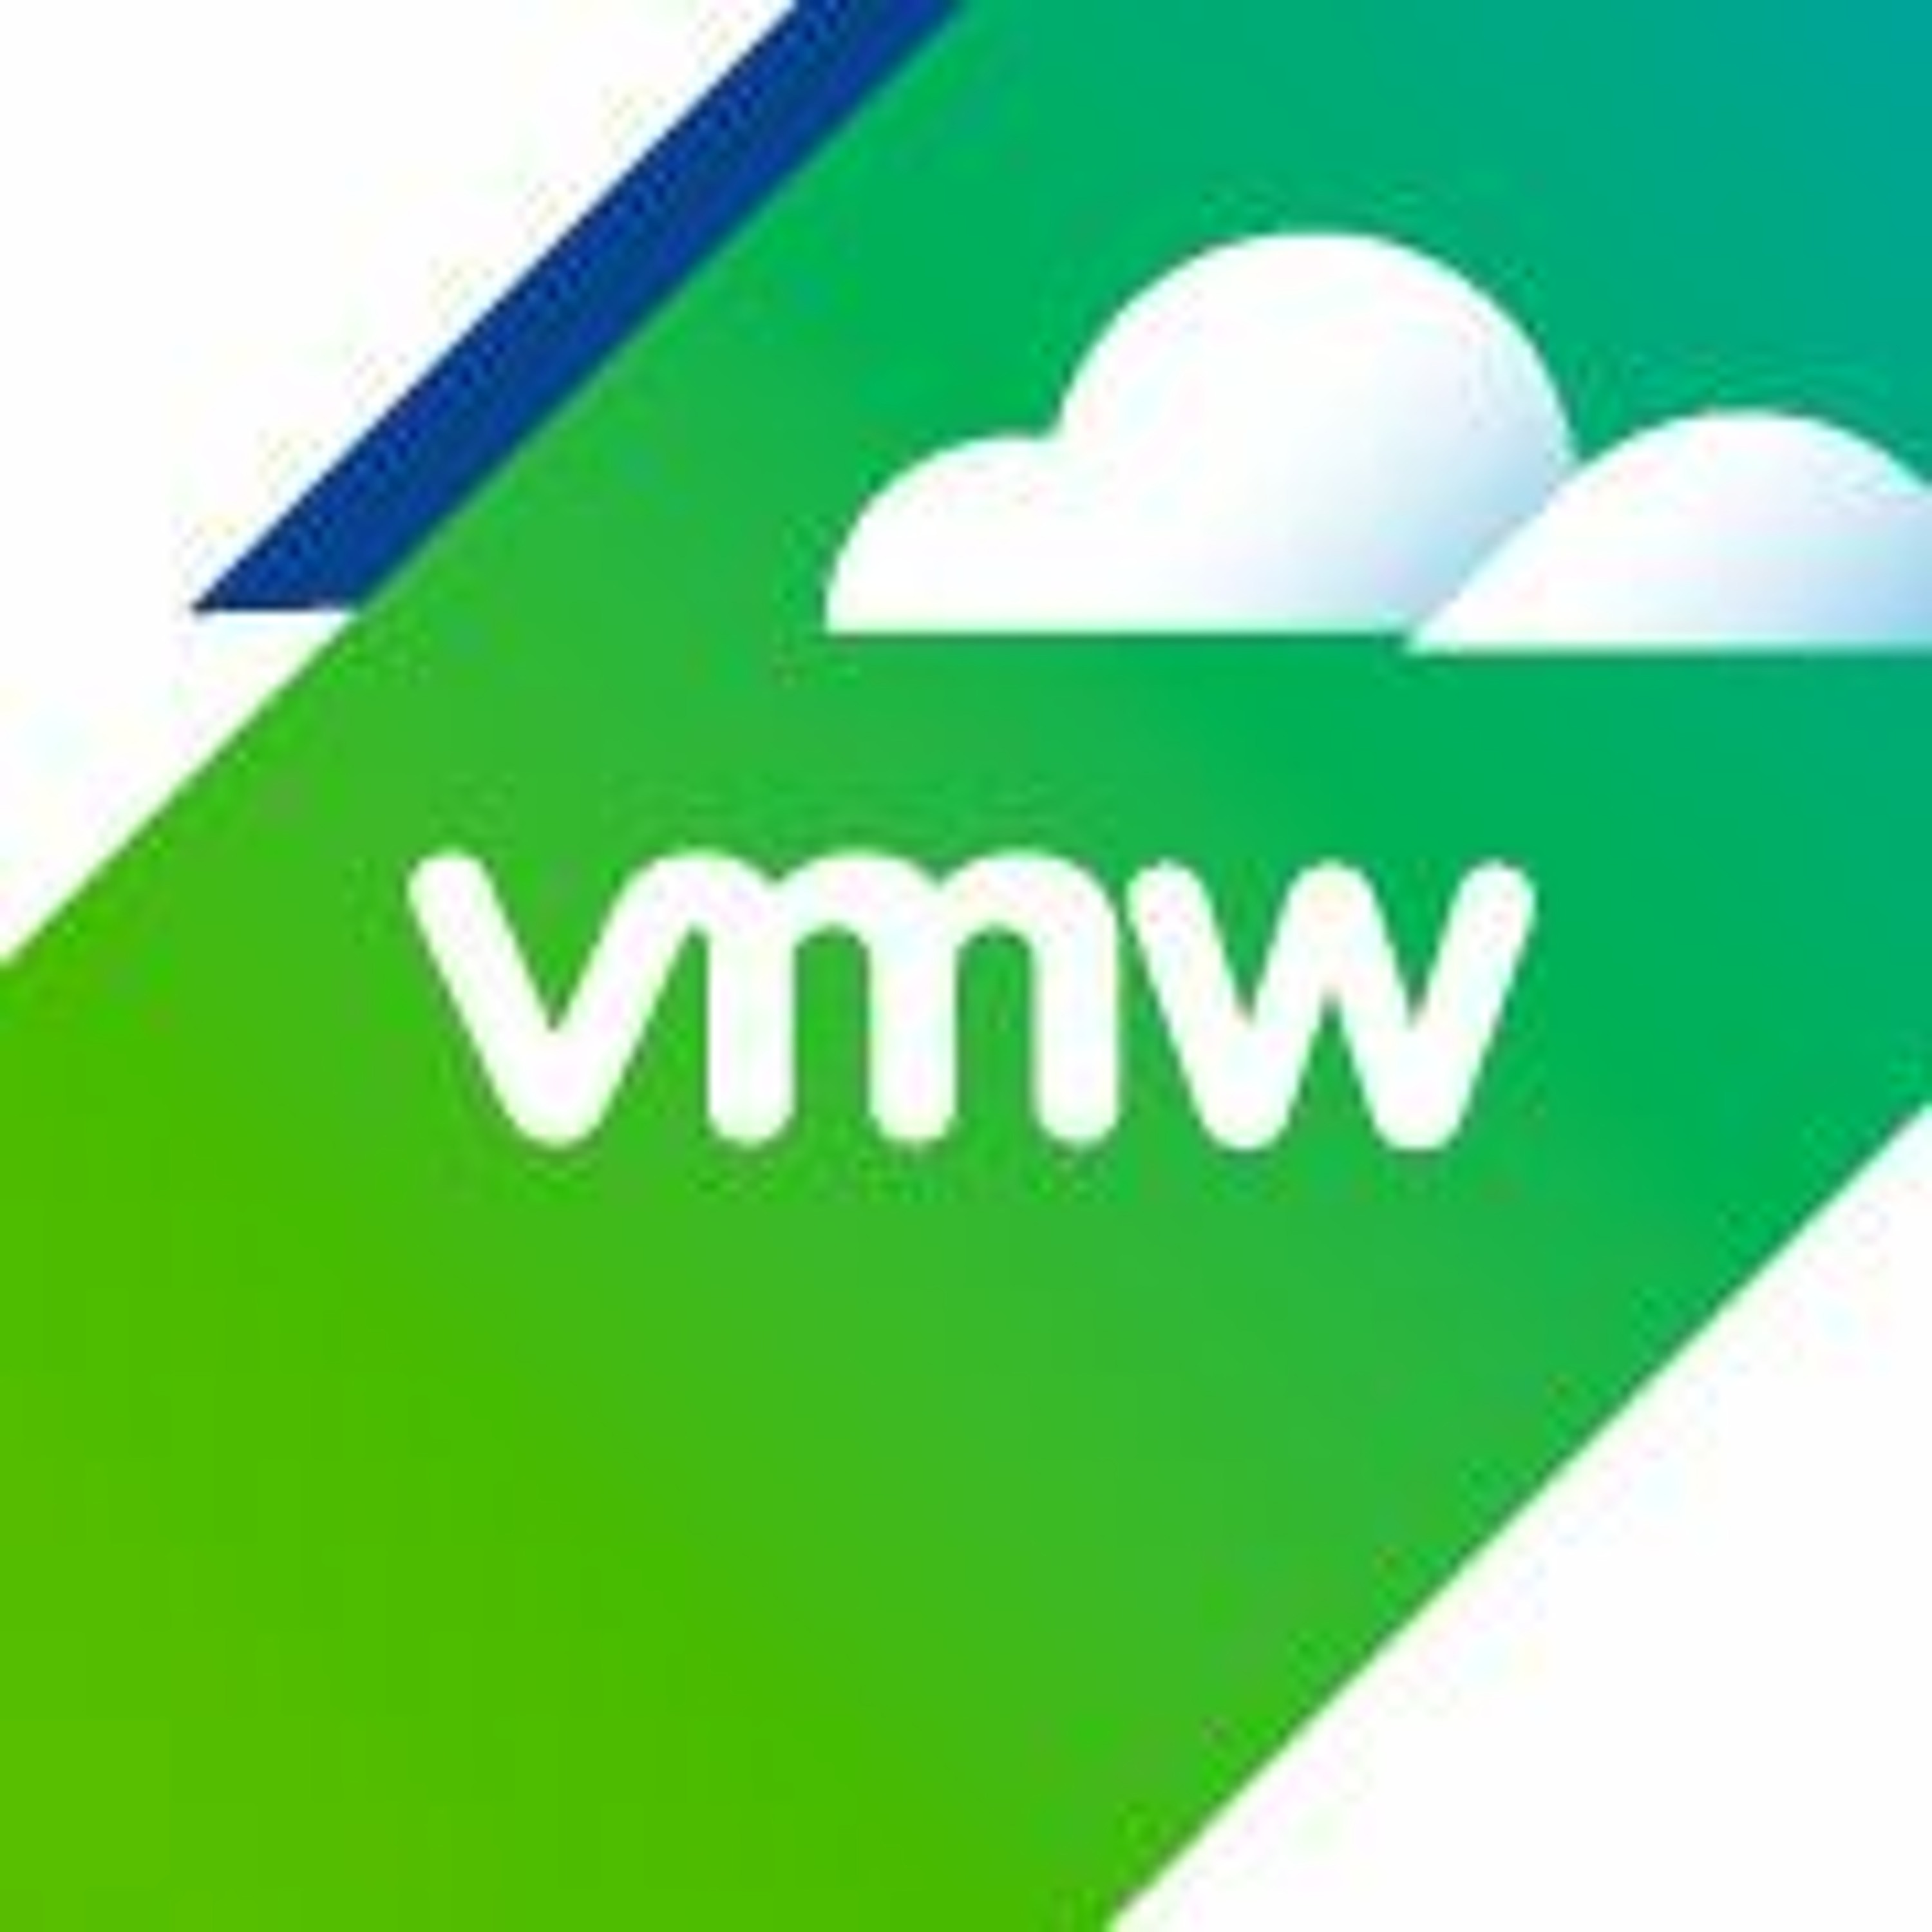 VMware Multi-Cloud Podcast: Lee Caswell, VMware VP discusses the State of Cloud